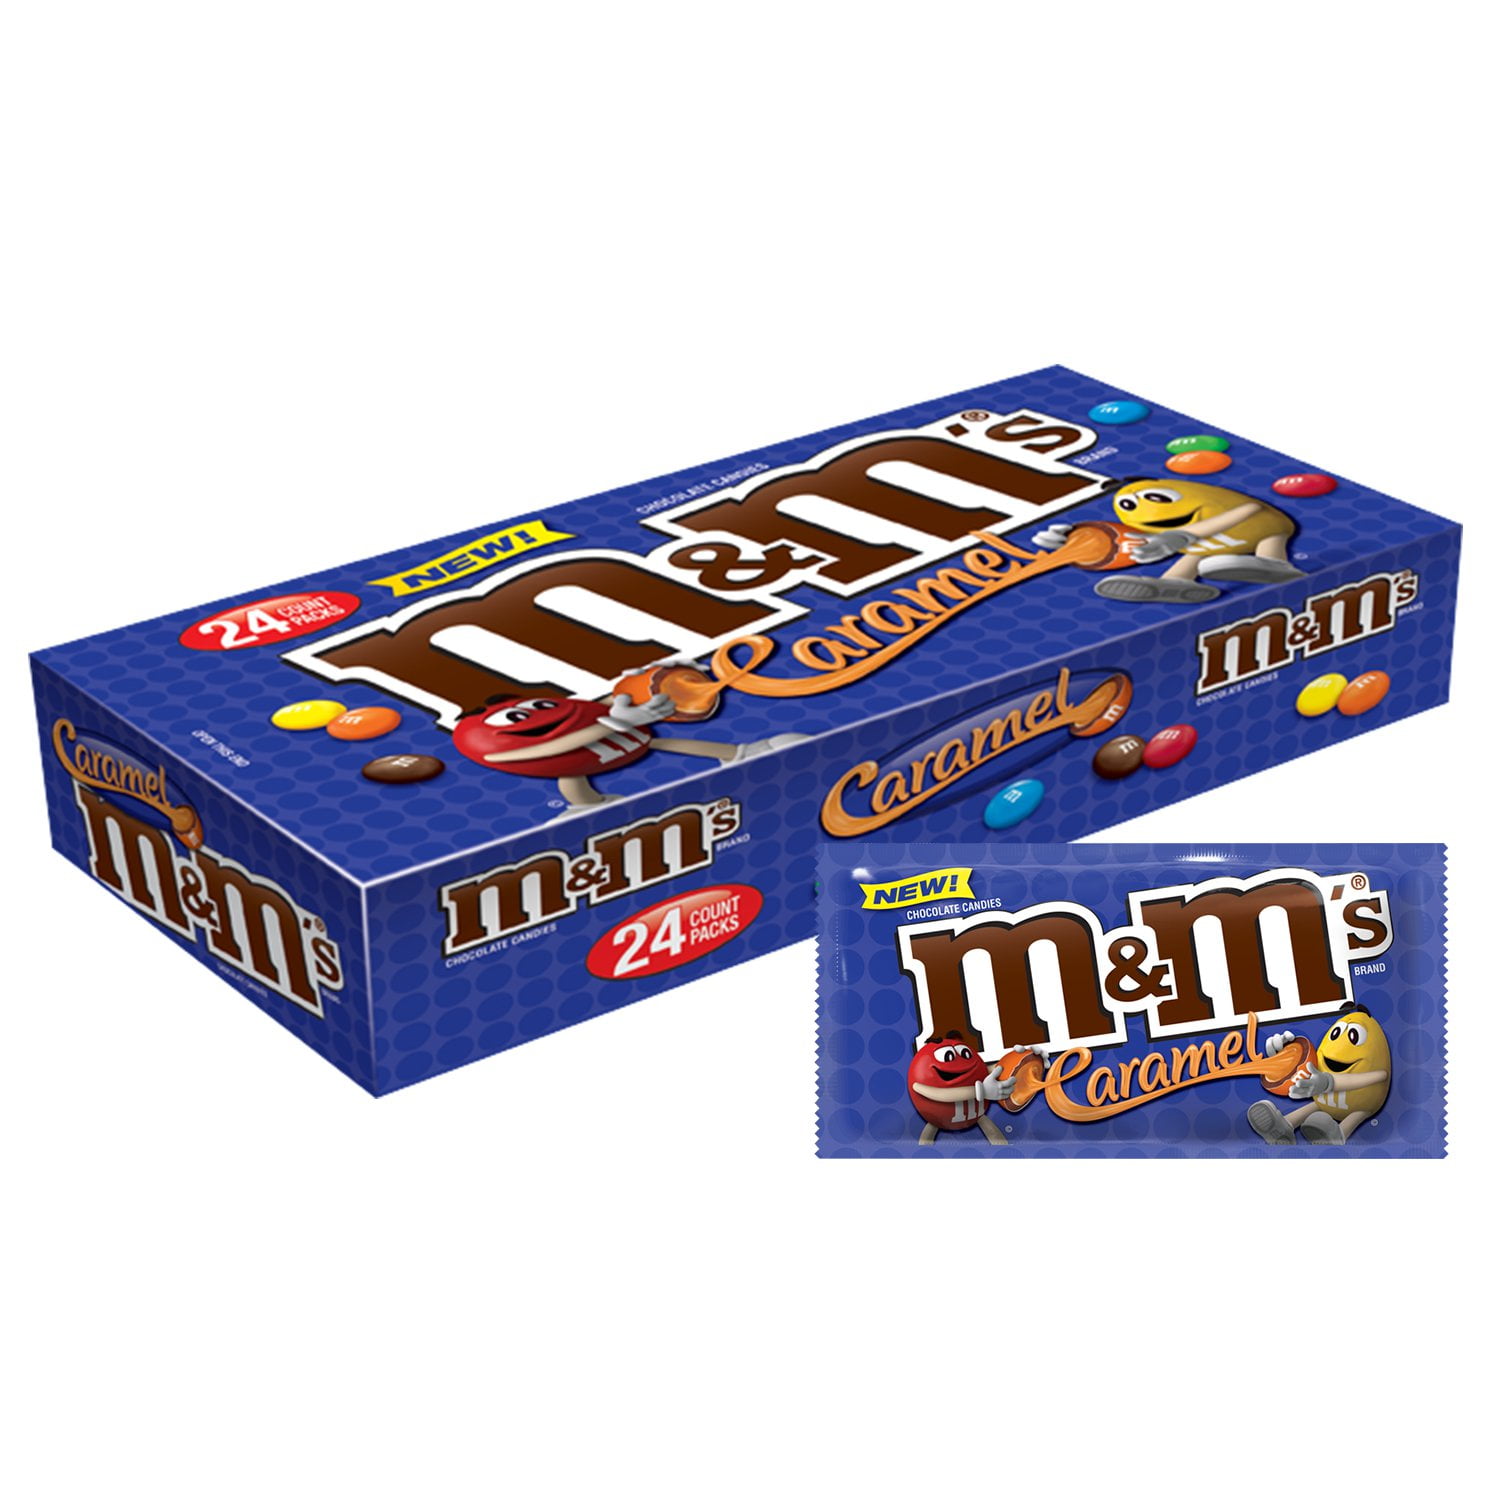 M&M'S Caramel Chocolate Candy Singles Size, 1.41 Ounce Pouch, 24 Count Box